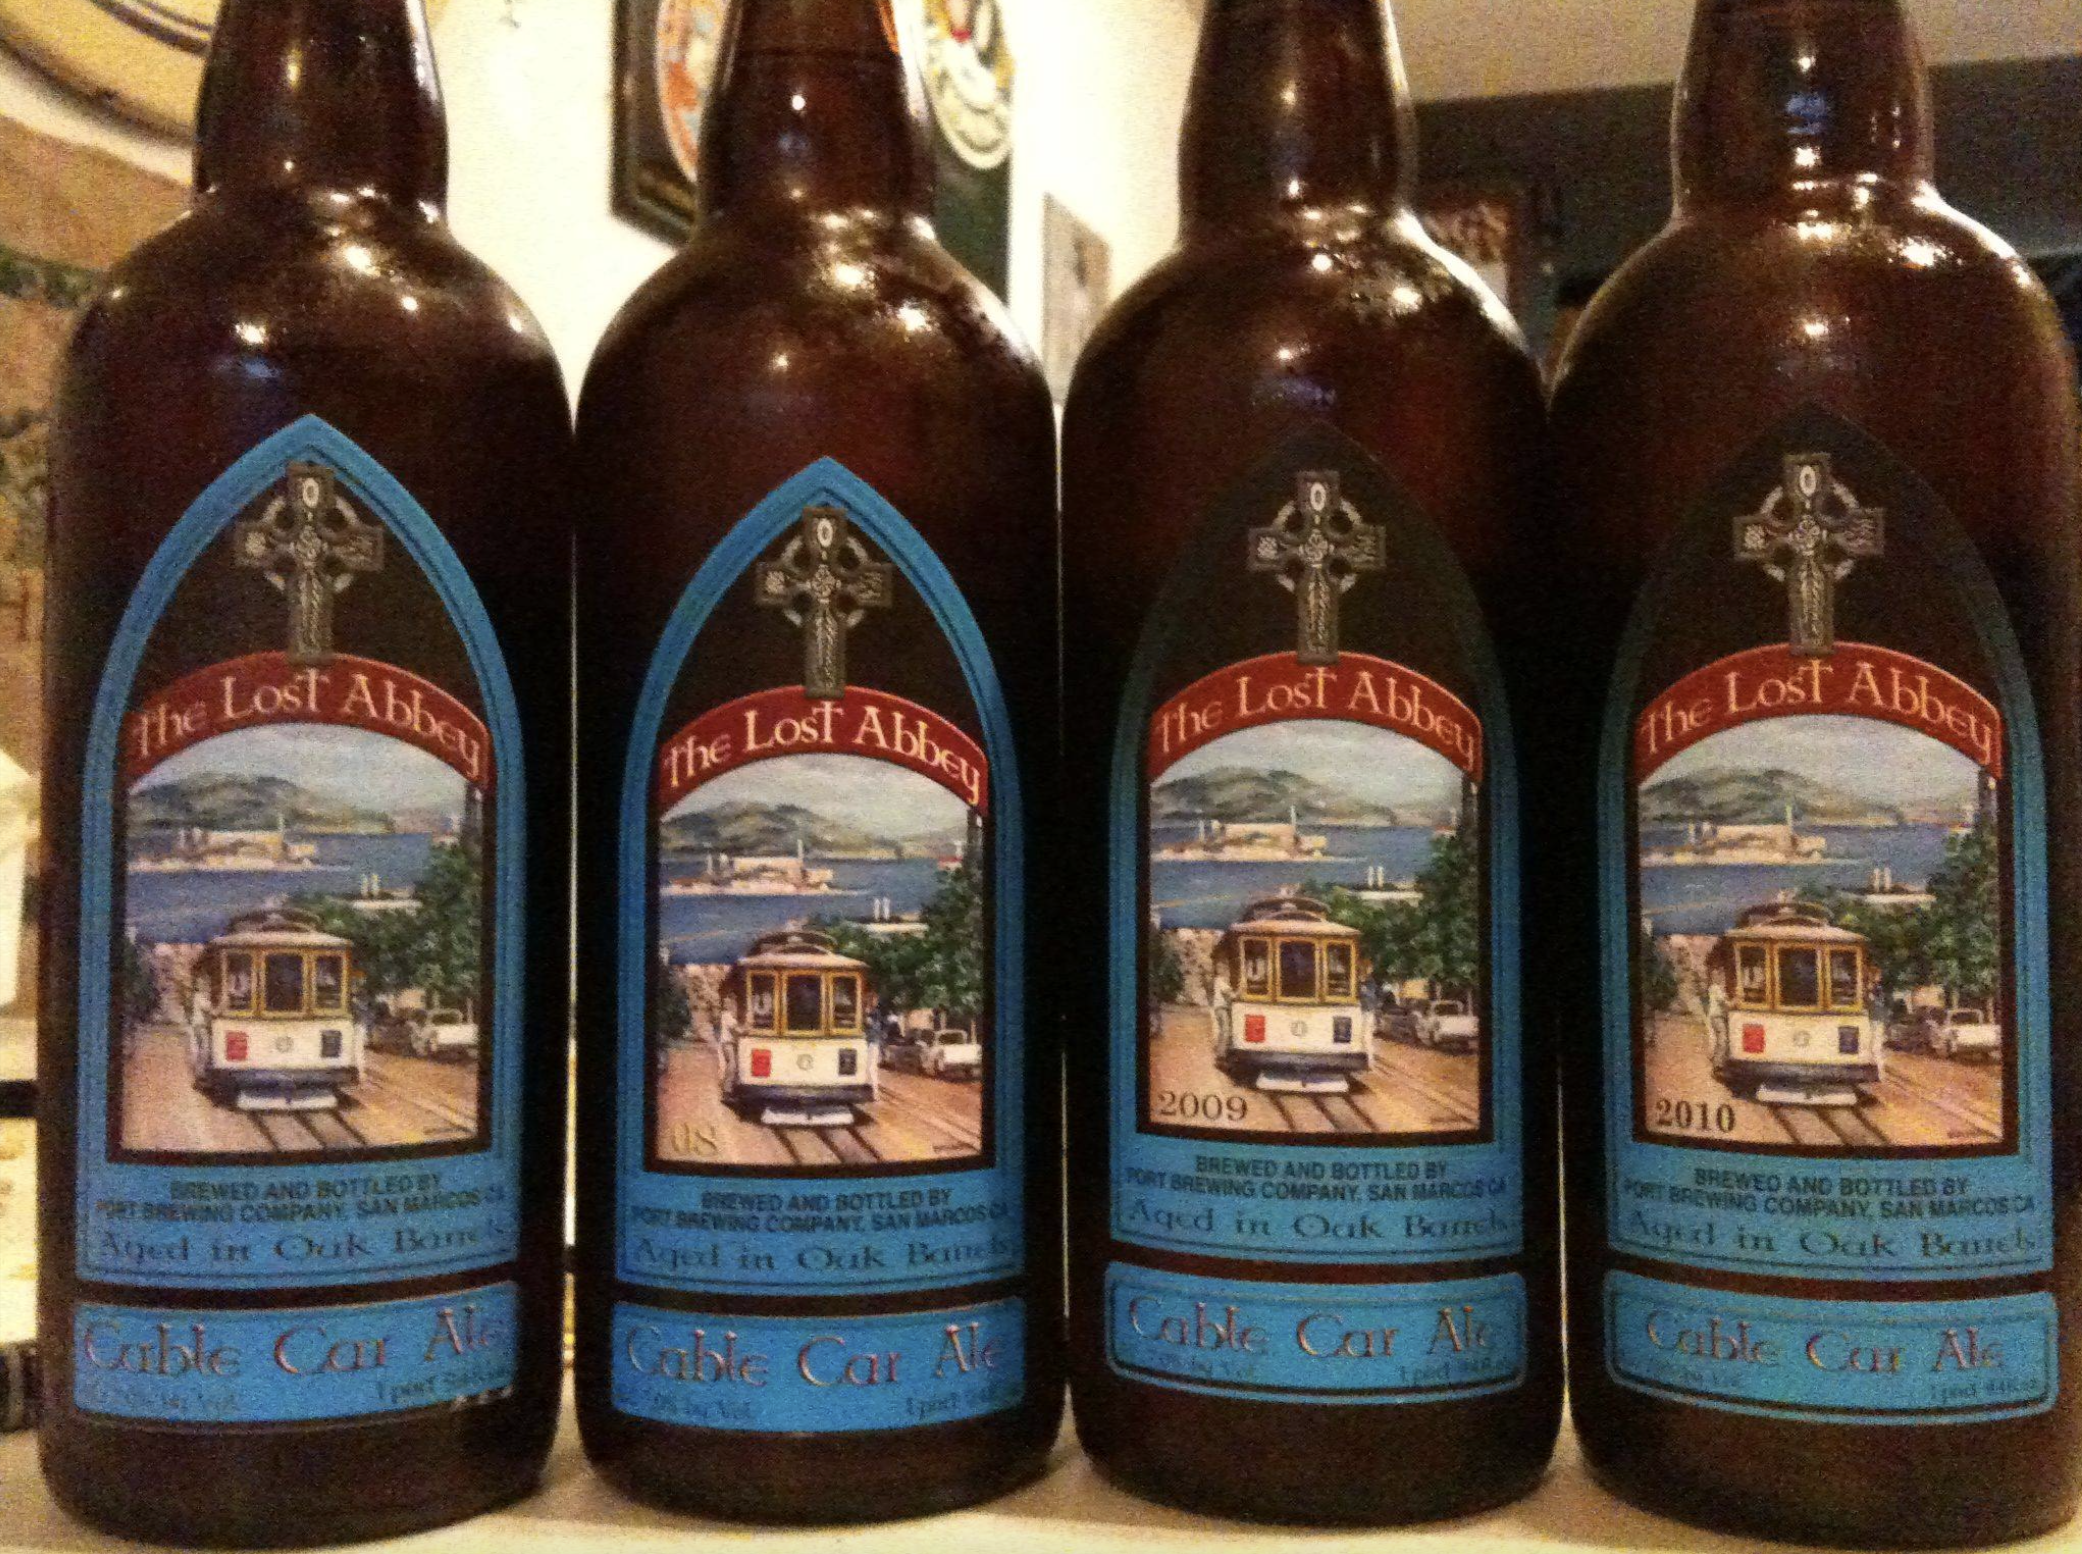 The Lost Abbey Cable Car Ale: A Rarity in Craft Beer Excellence